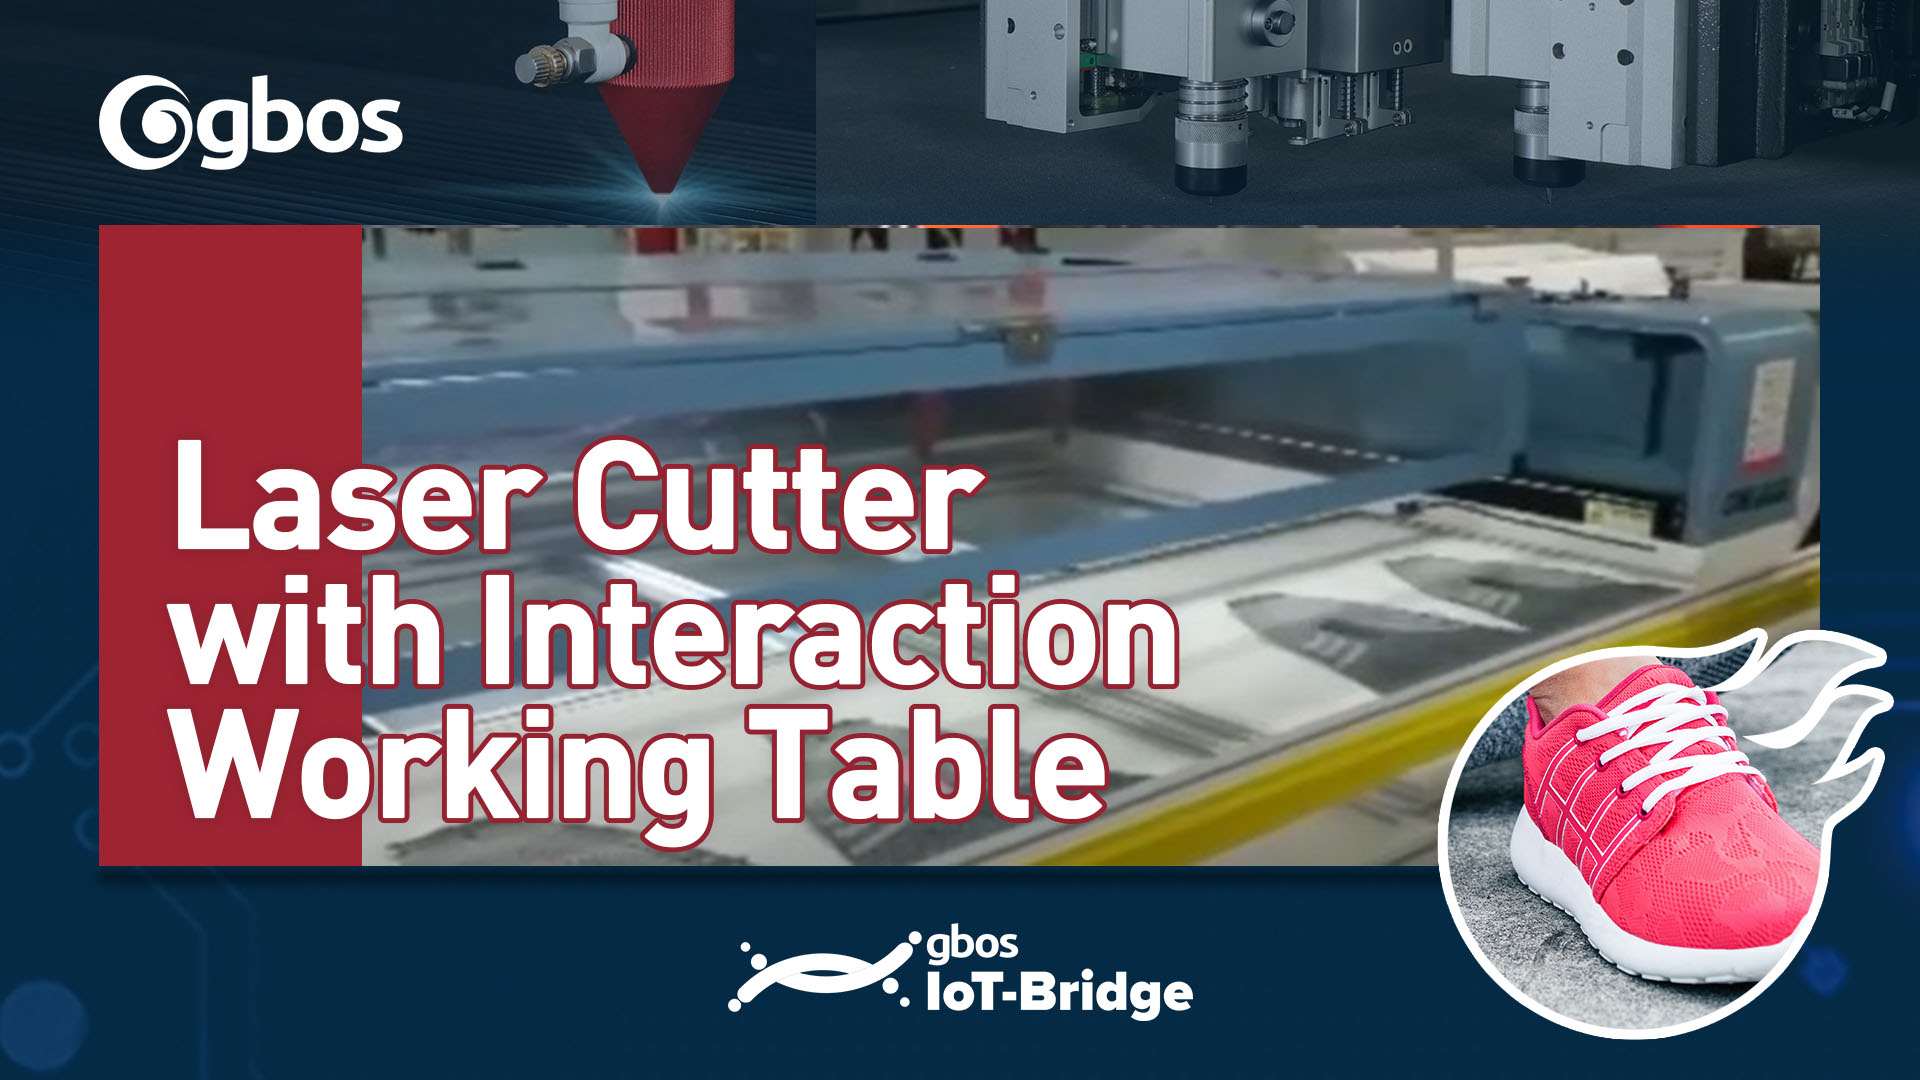 Laser Cutter with Interaction Working Table